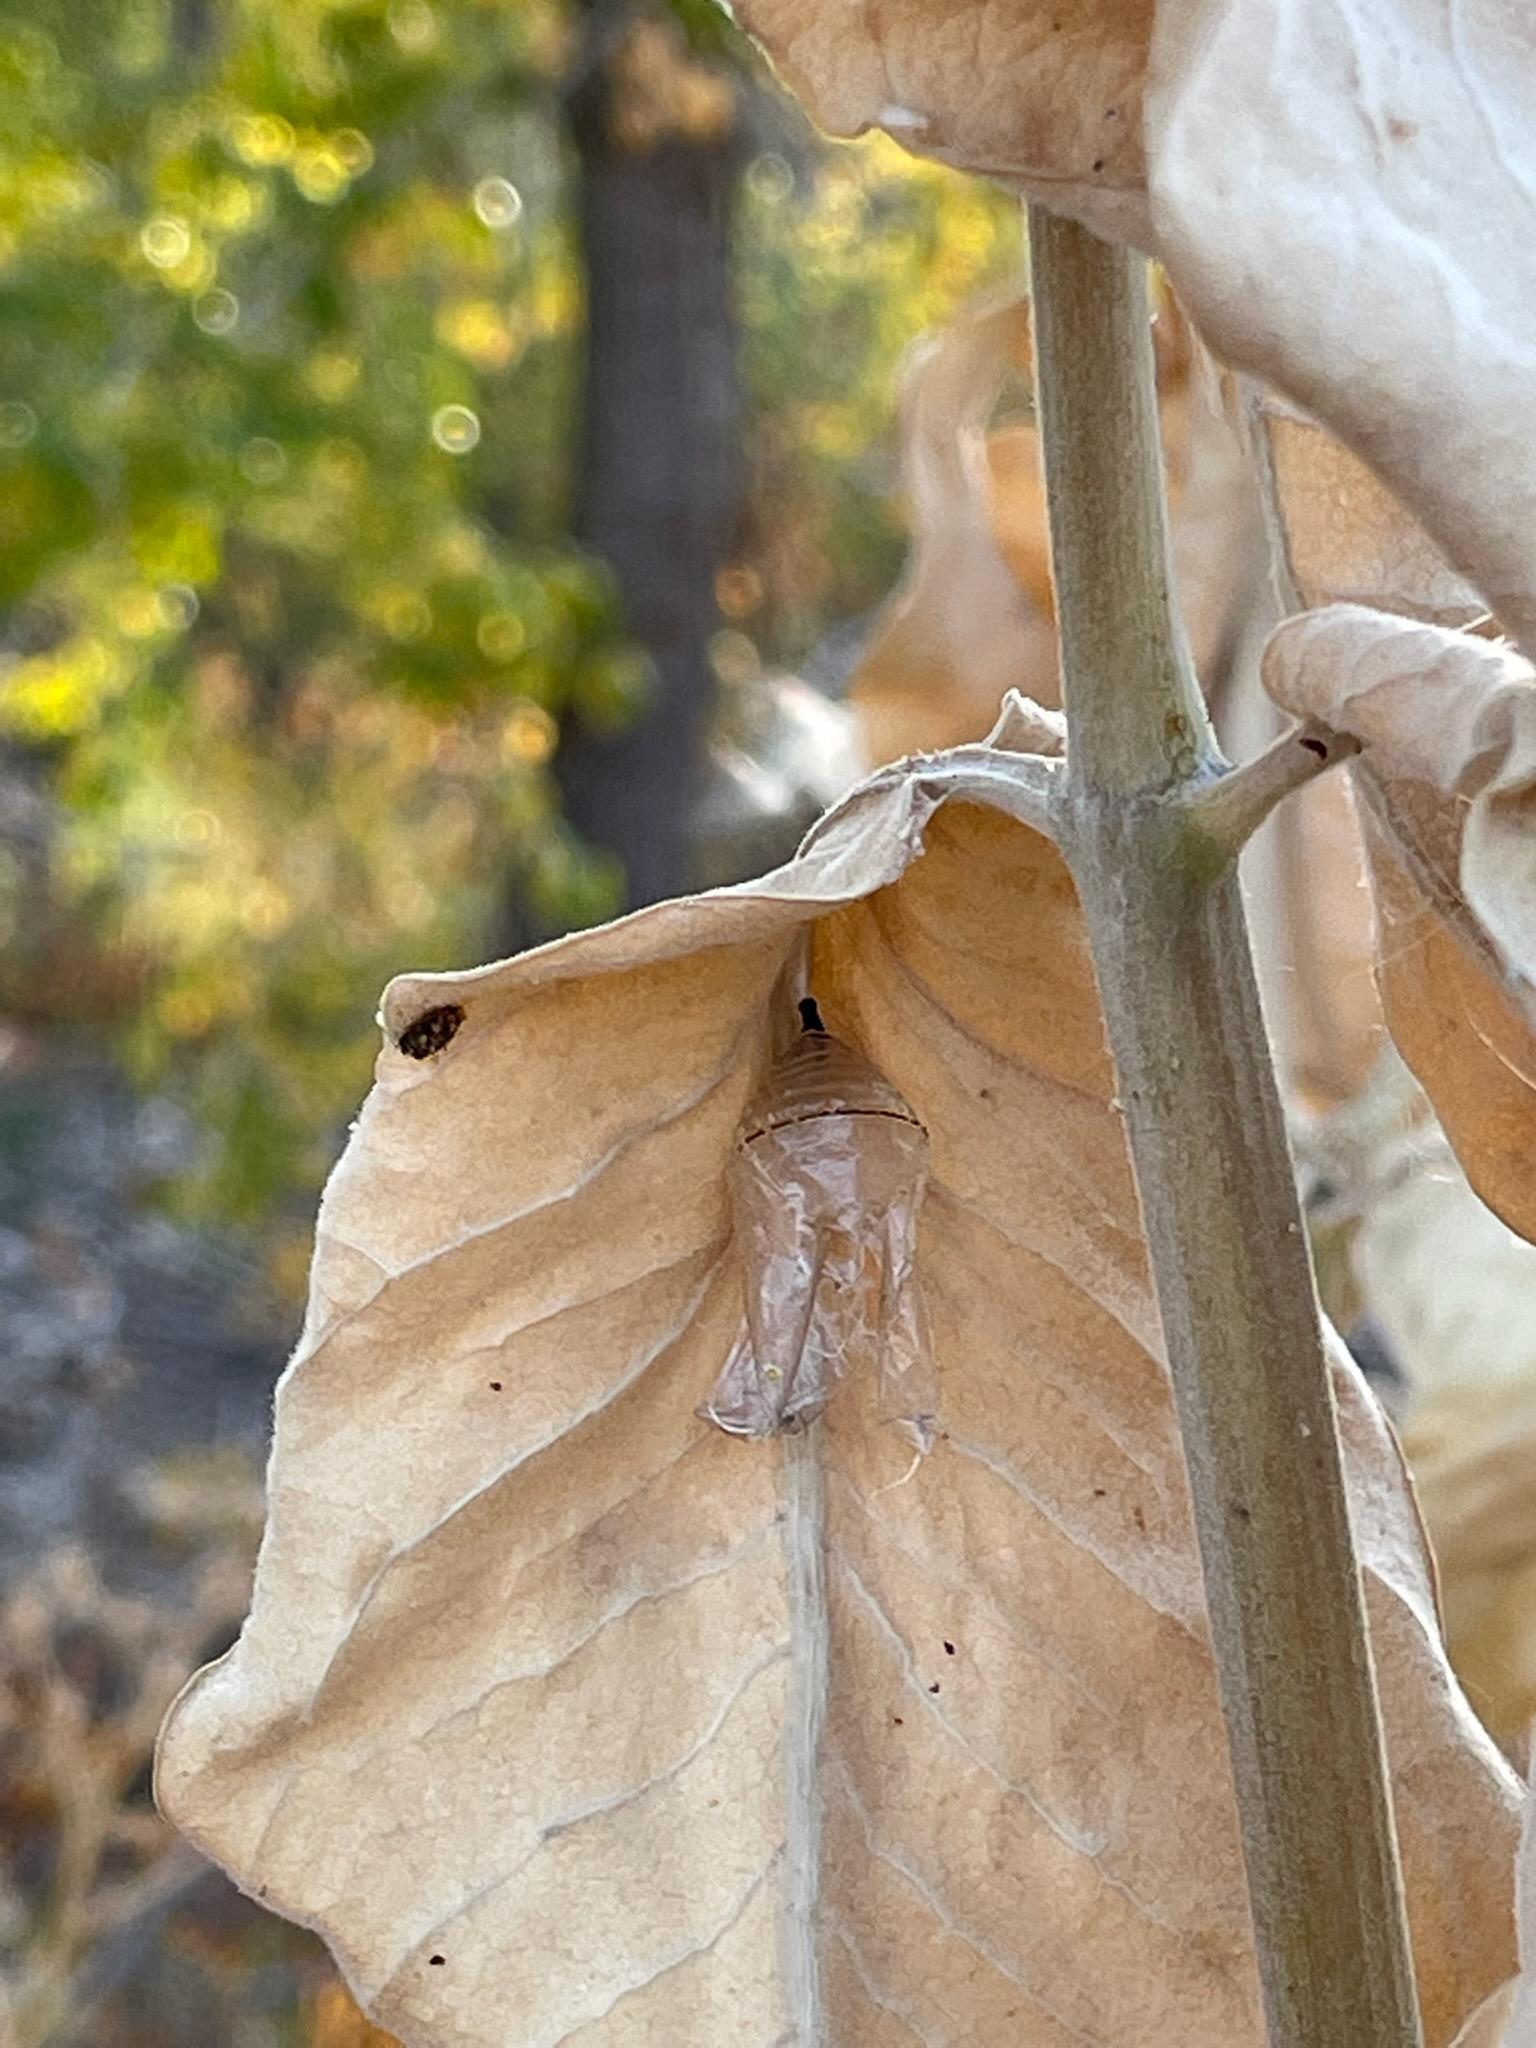 a thin transparent shell hangs from the leaf. it looks like a crinkled plastic candy wrapper